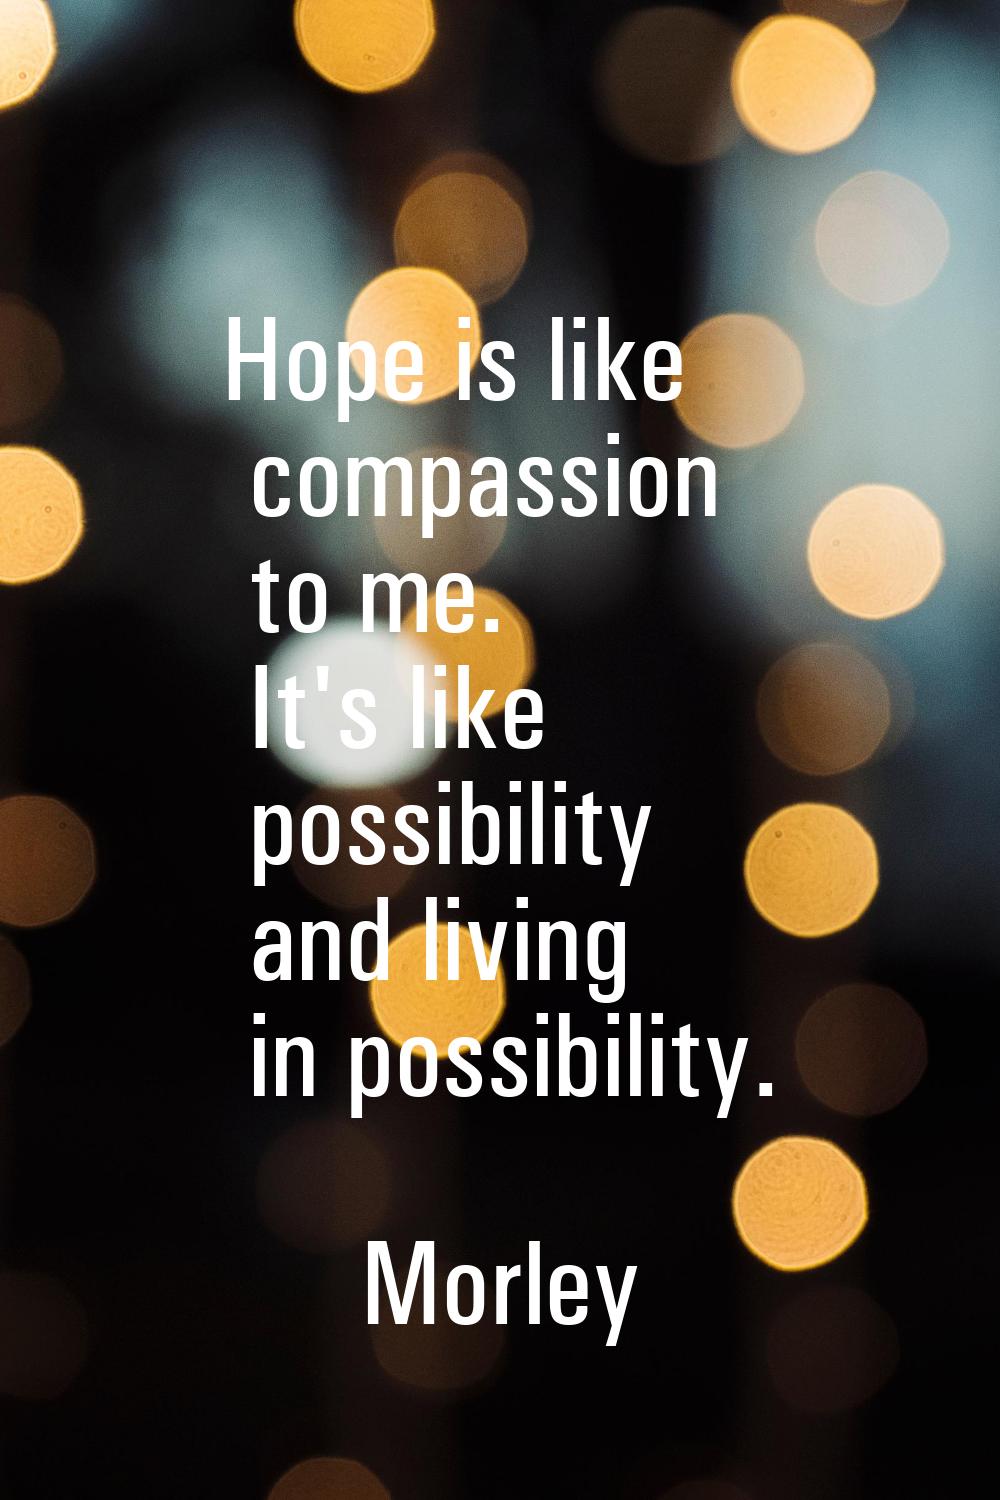 Hope is like compassion to me. It's like possibility and living in possibility.